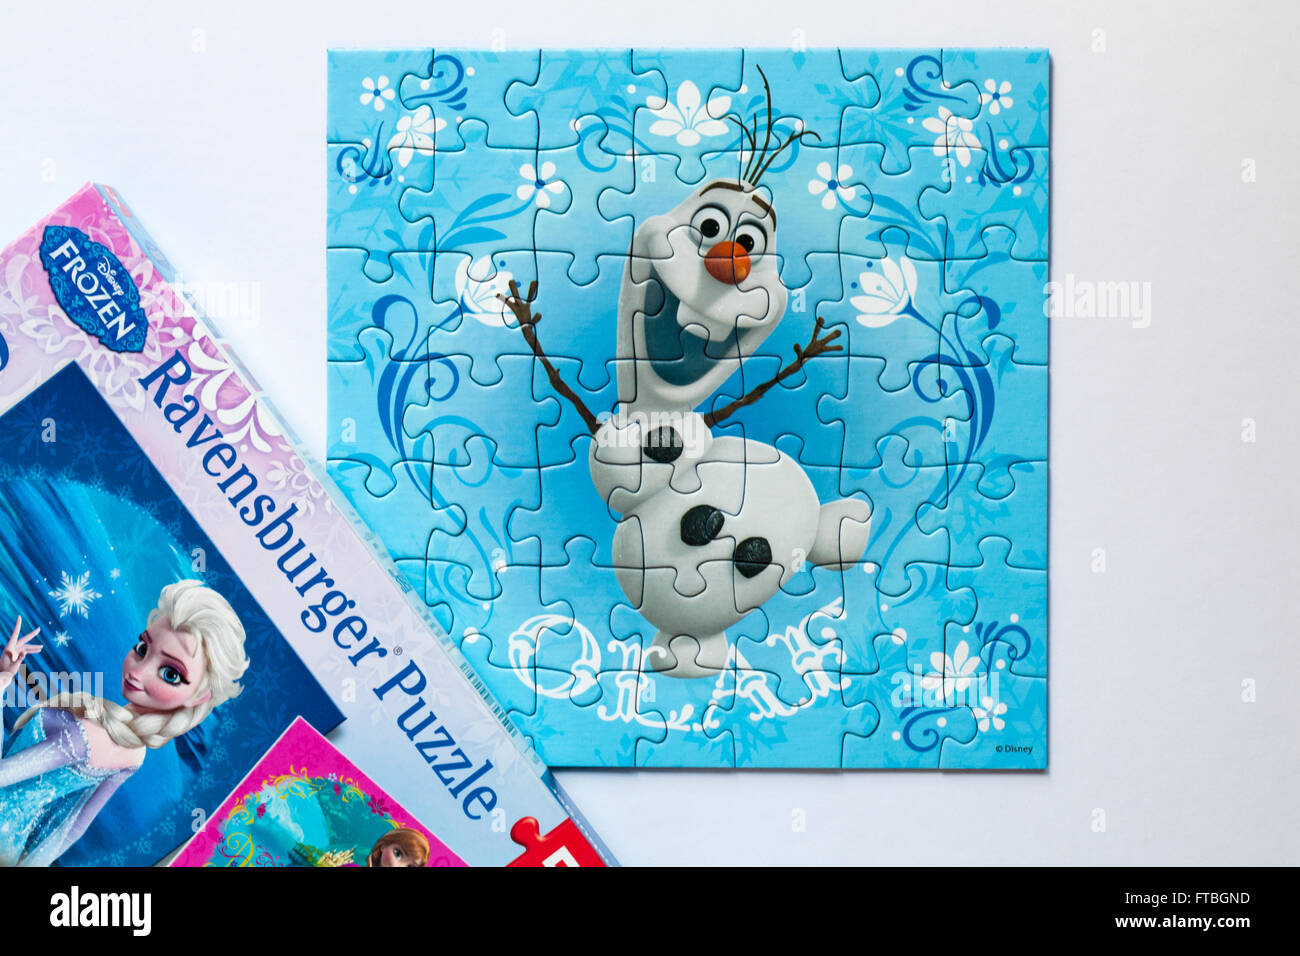 Disney Frozen Ravensburger Puzzle jigsaw puzzle with puzzle of Olaf  character set on white background Stock Photo - Alamy